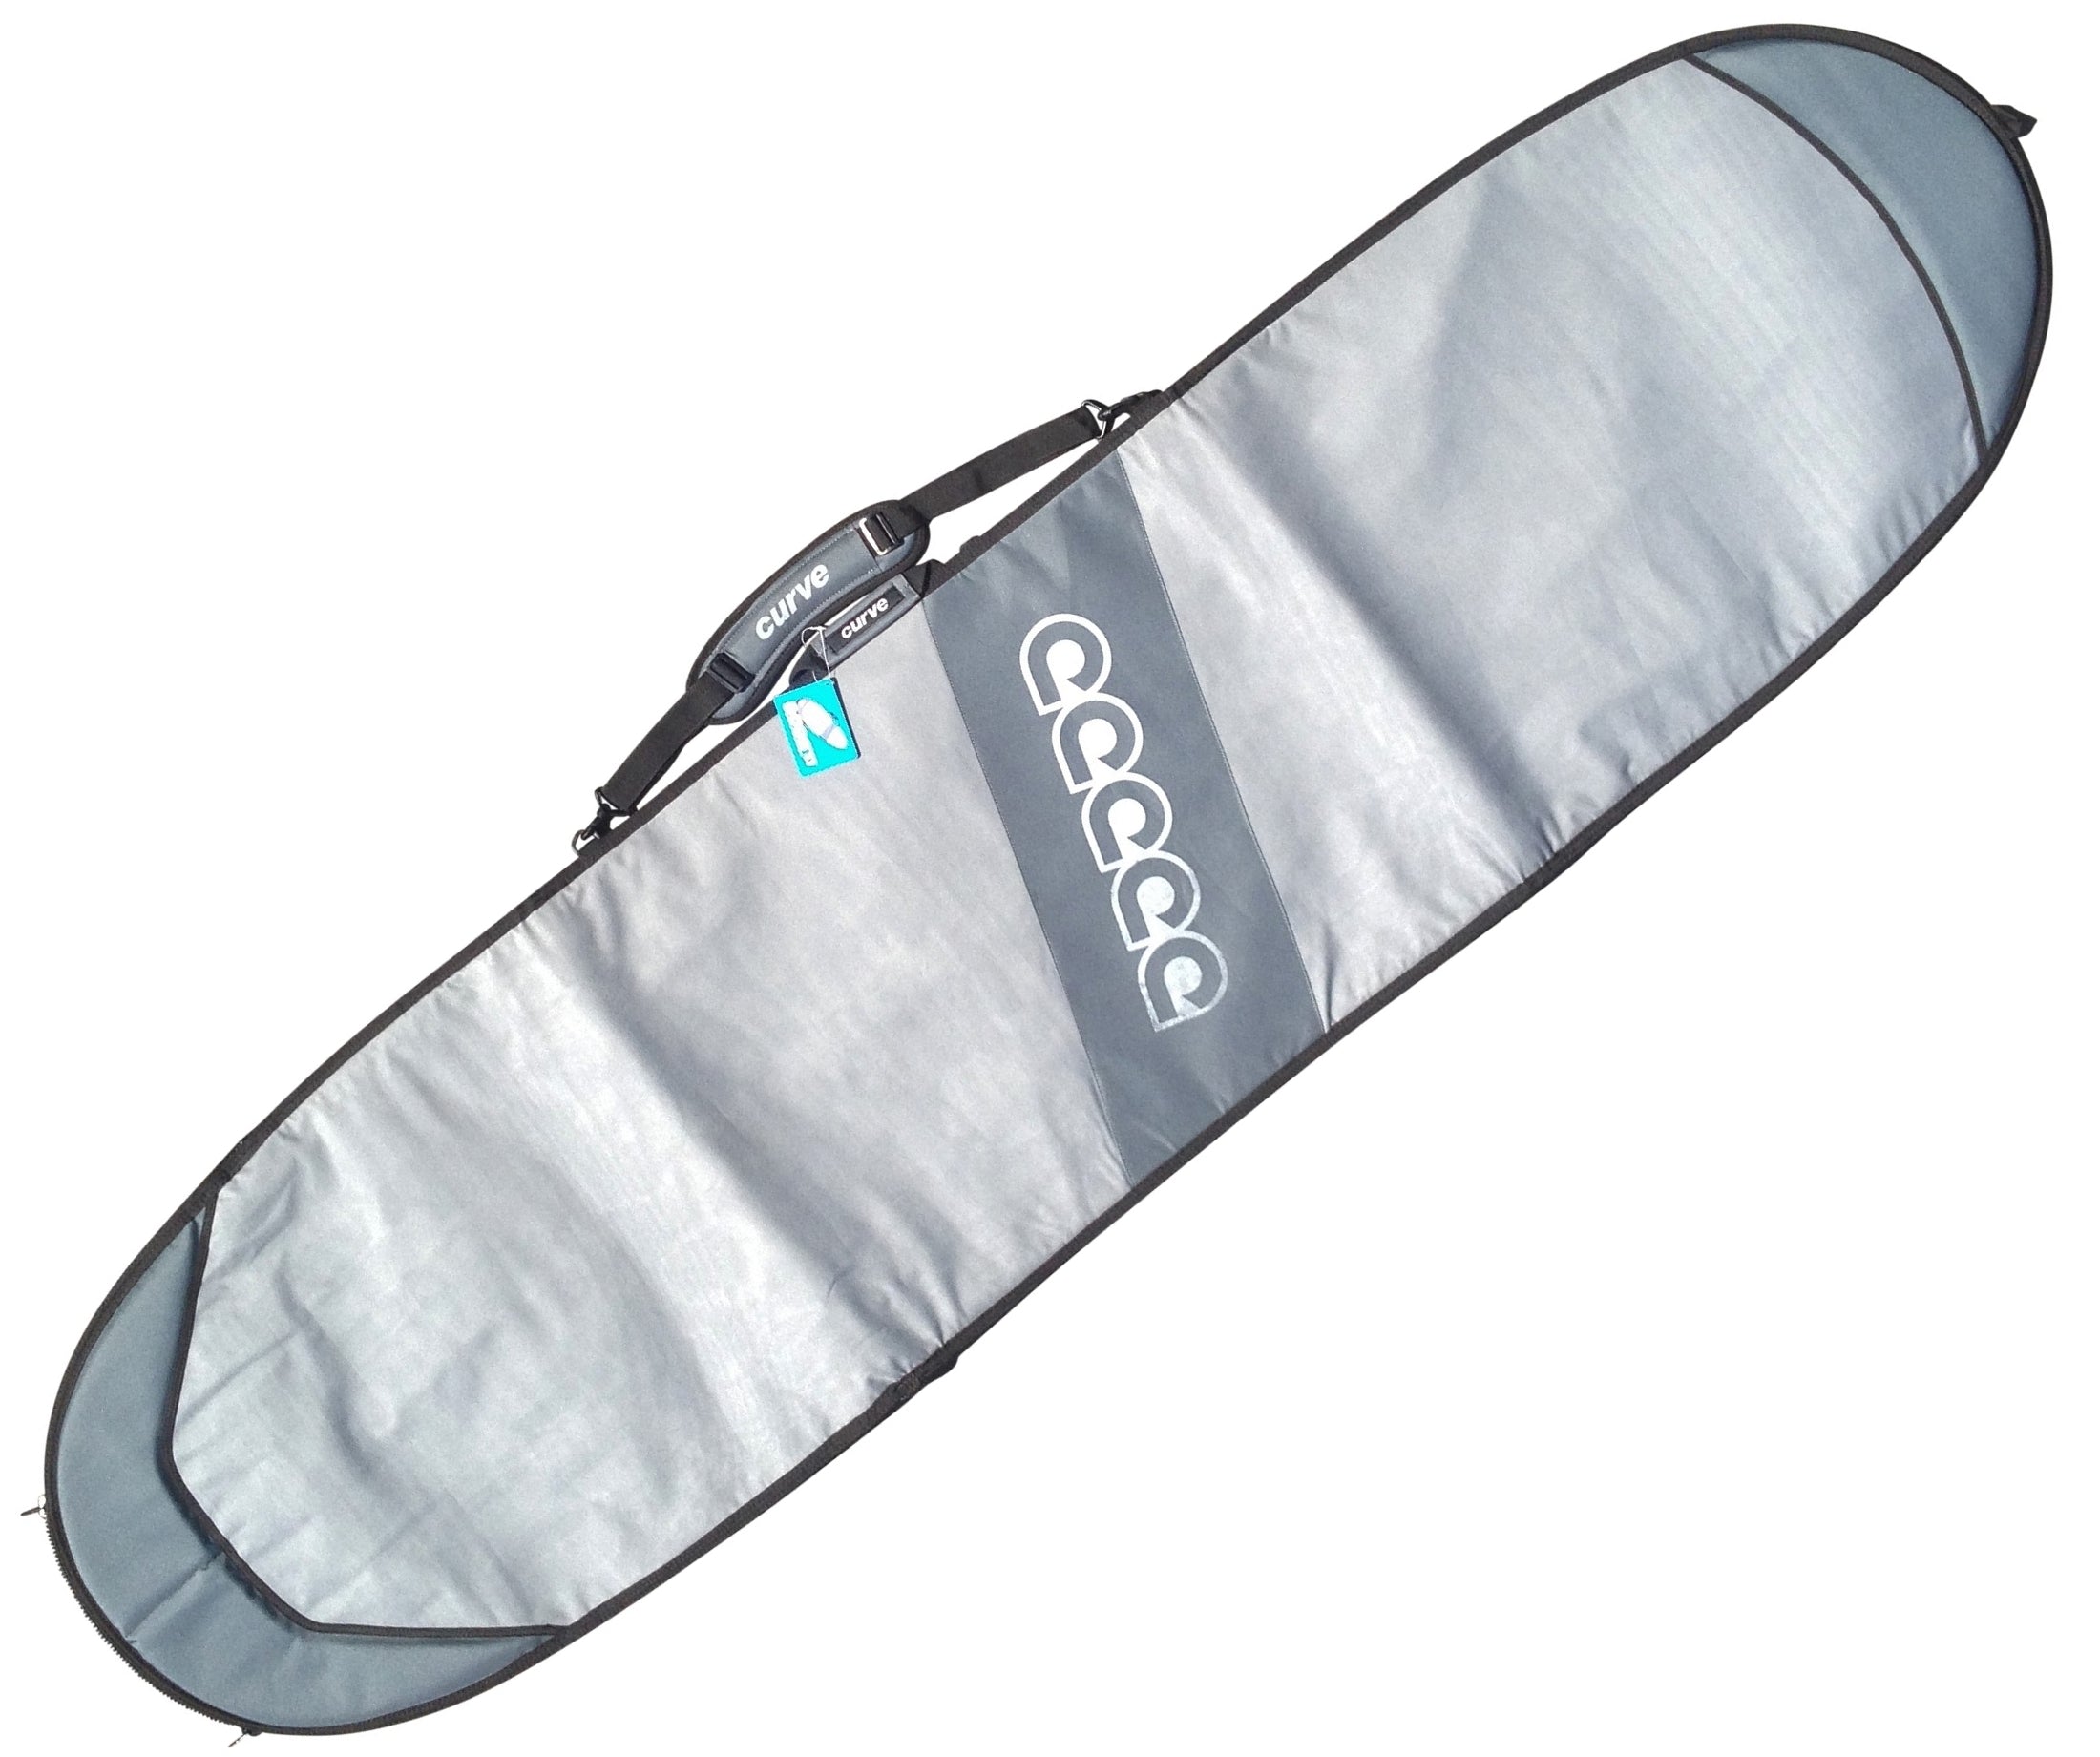 SURFBOARD BAGS I Buy Surfbags for wave riders online